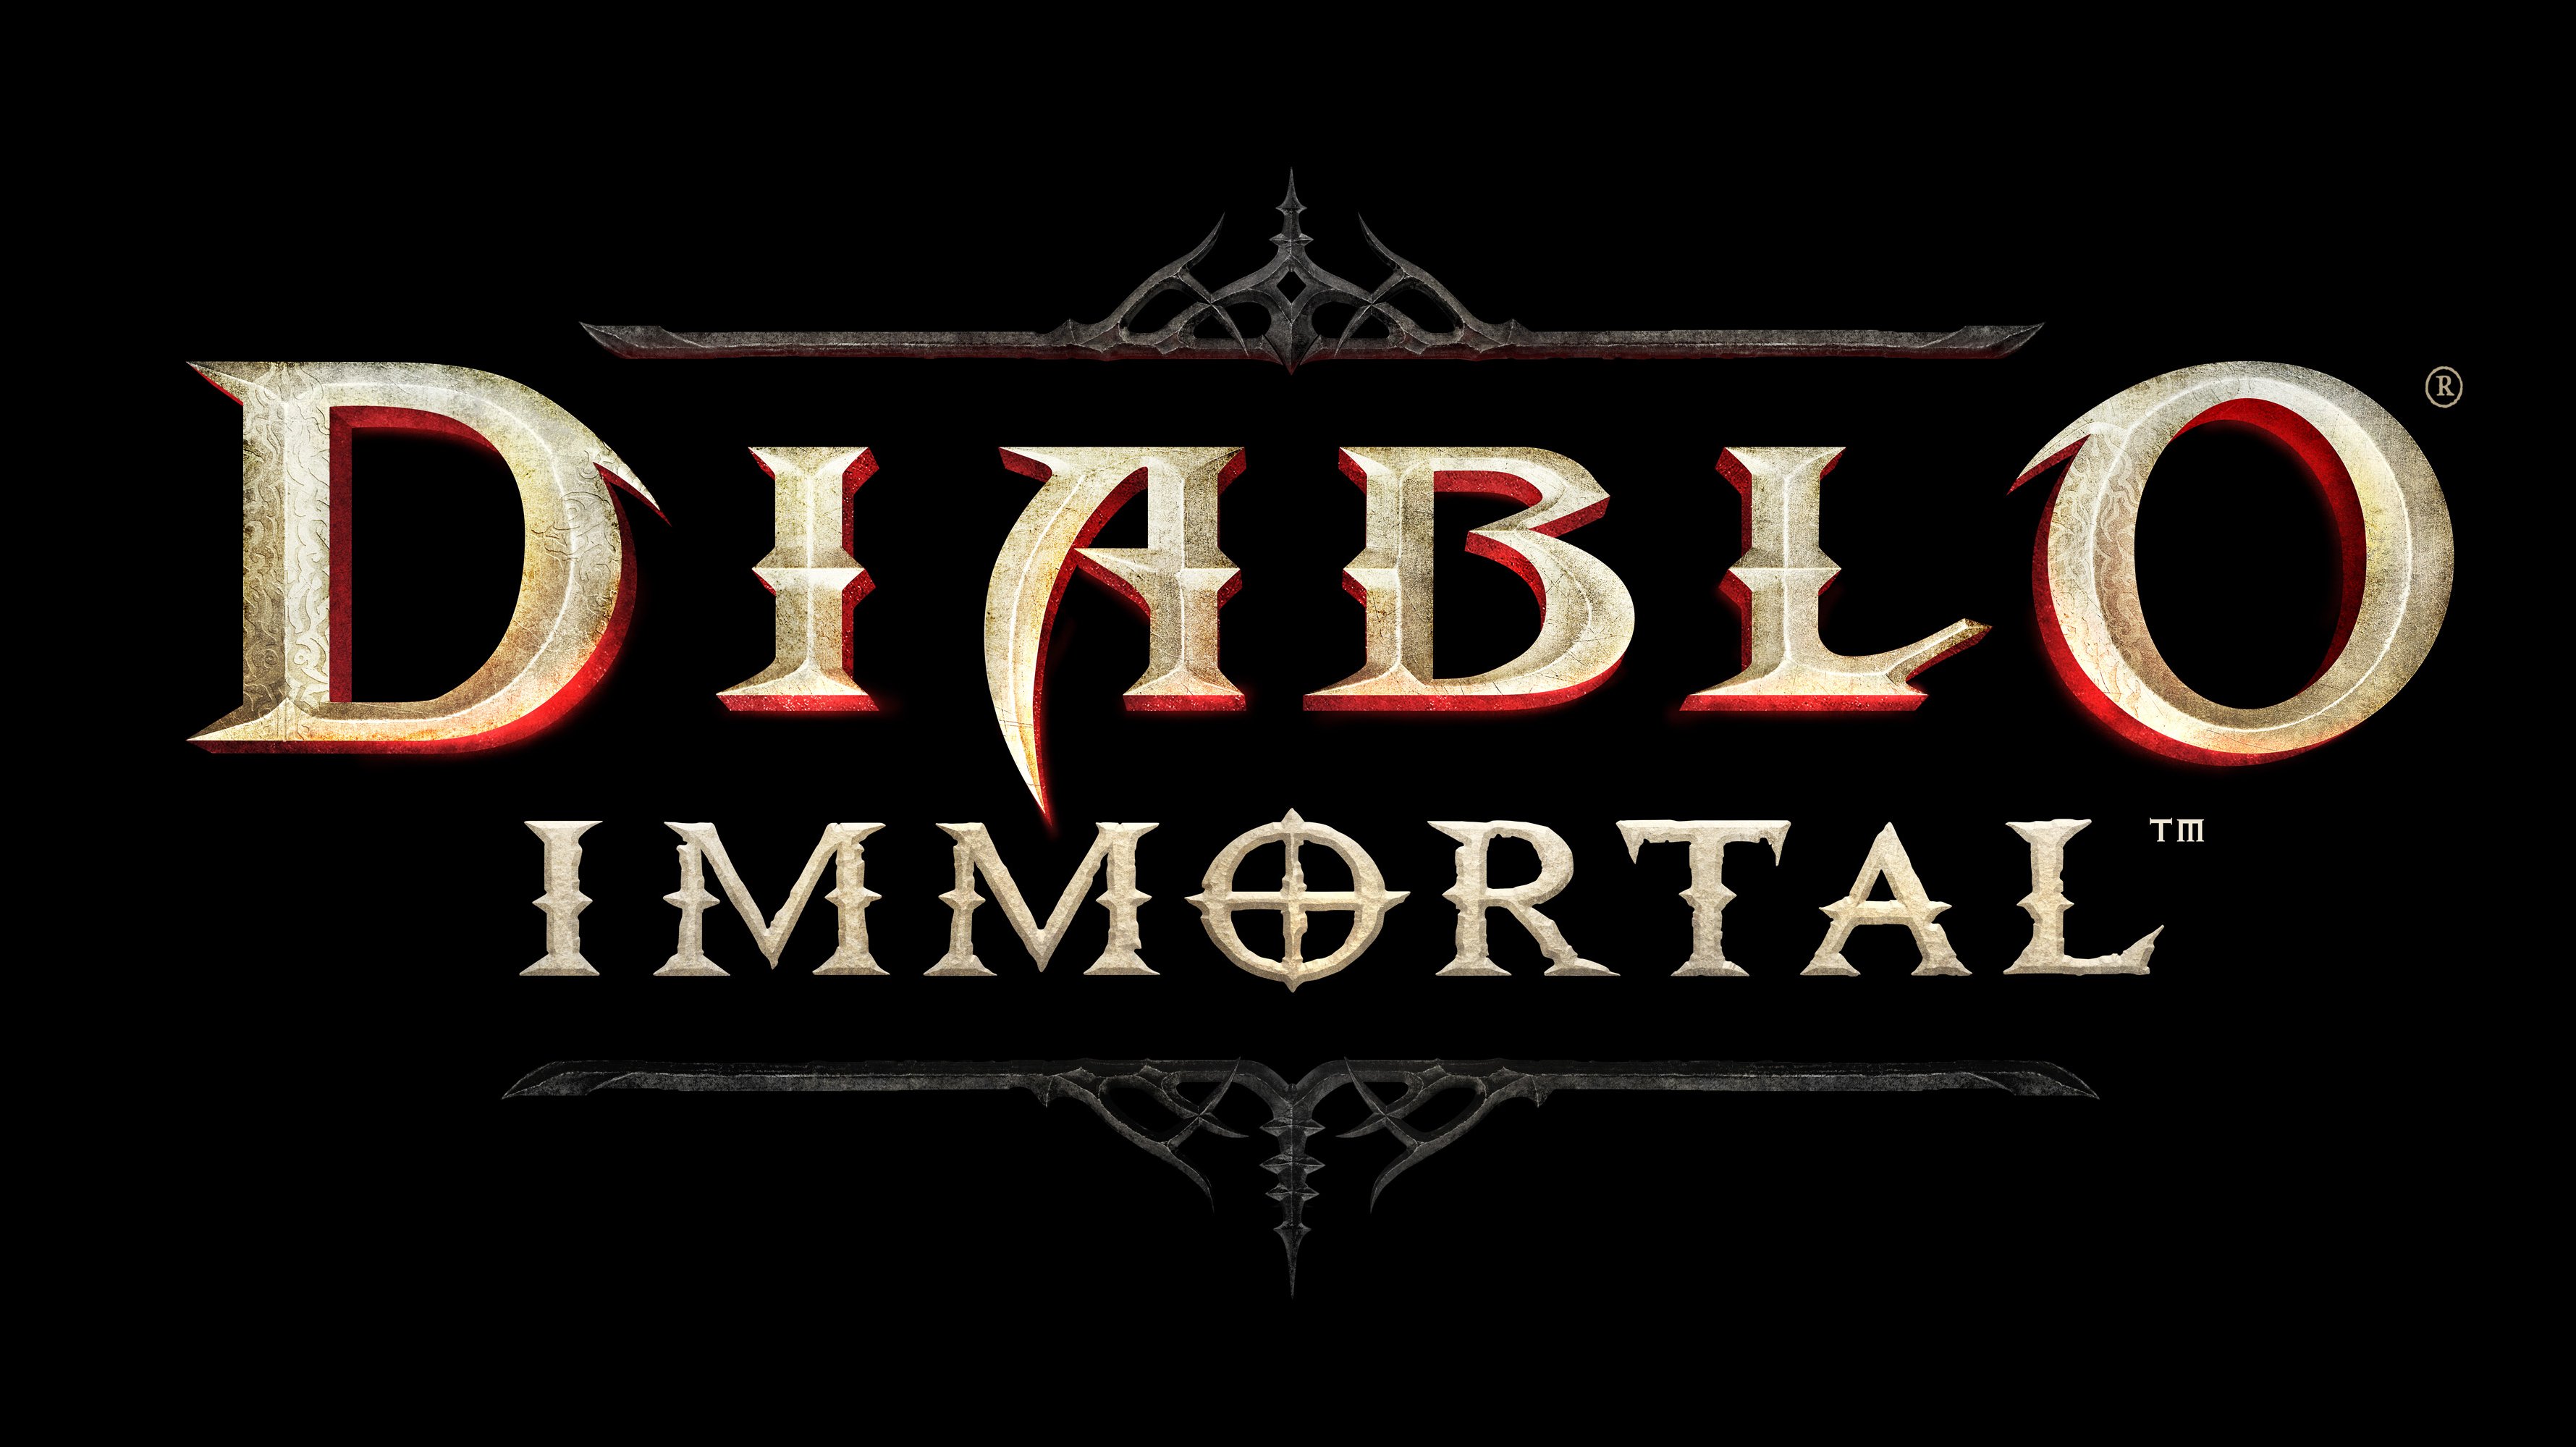 diablo immortal announcement what were they thinking